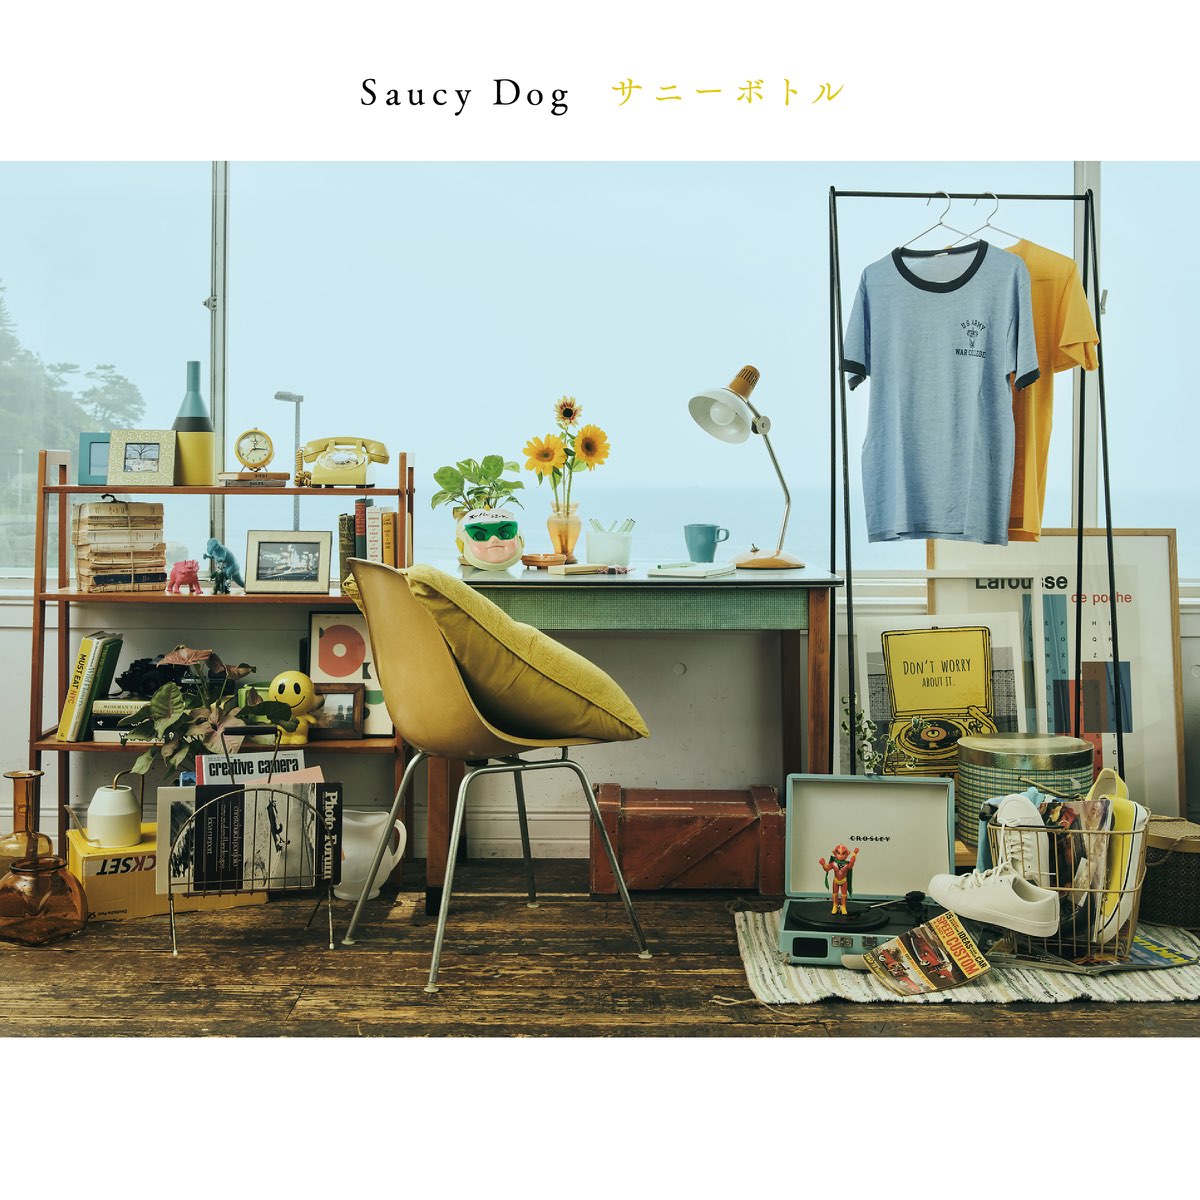 ‎Sunny Bottle by Saucy Dog on Apple Music